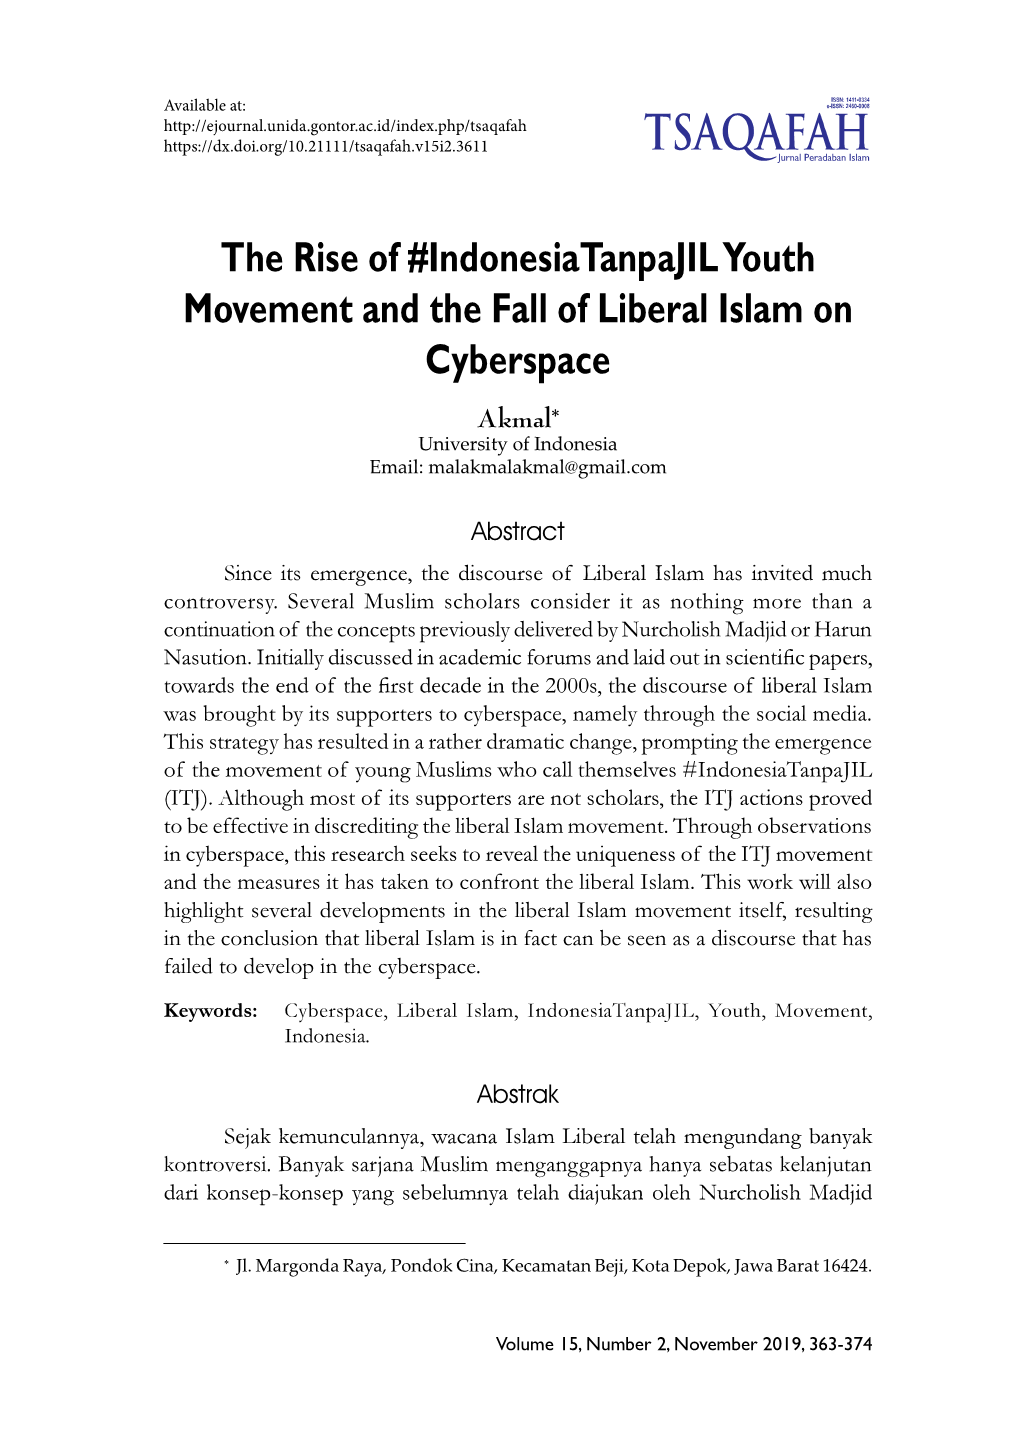 The Rise of #Indonesiatanpajil Youth Movement and the Fall of Liberal Islam on Cyberspace Akmal* University of Indonesia Email: Malakmalakmal@Gmail.Com